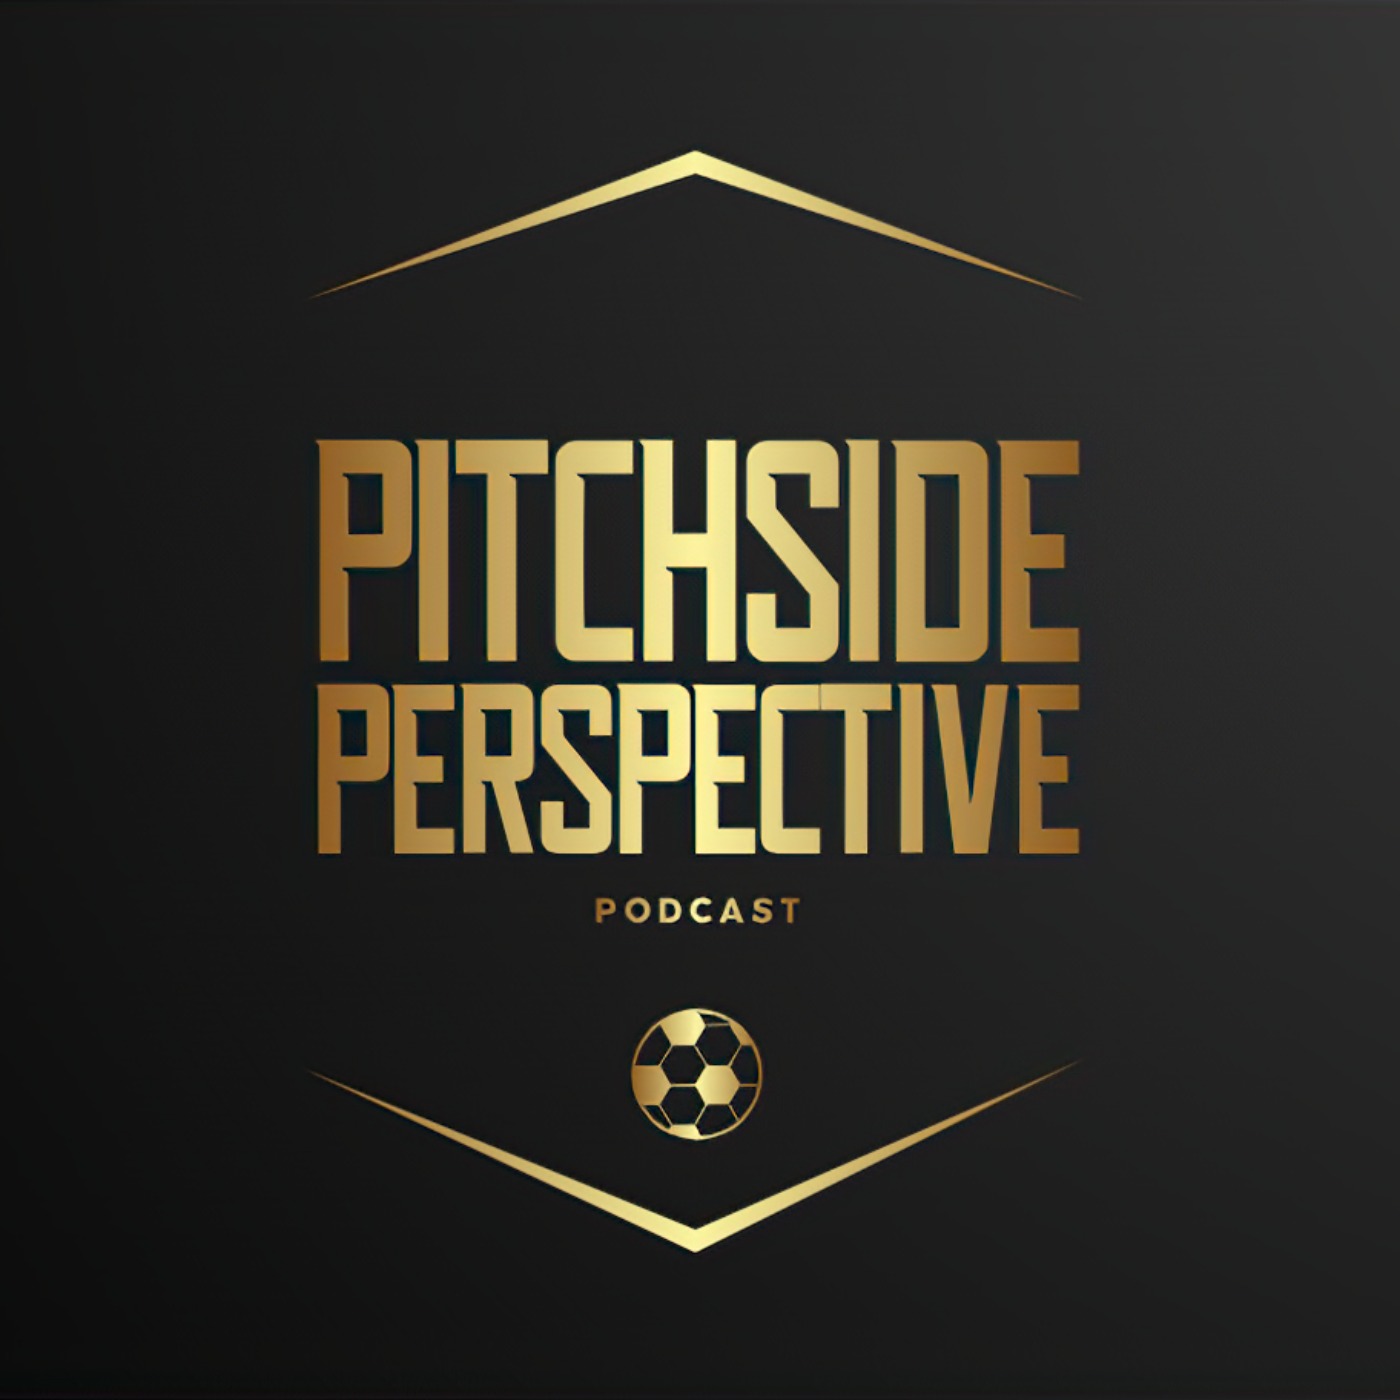 Pitchside Perspective Podcast